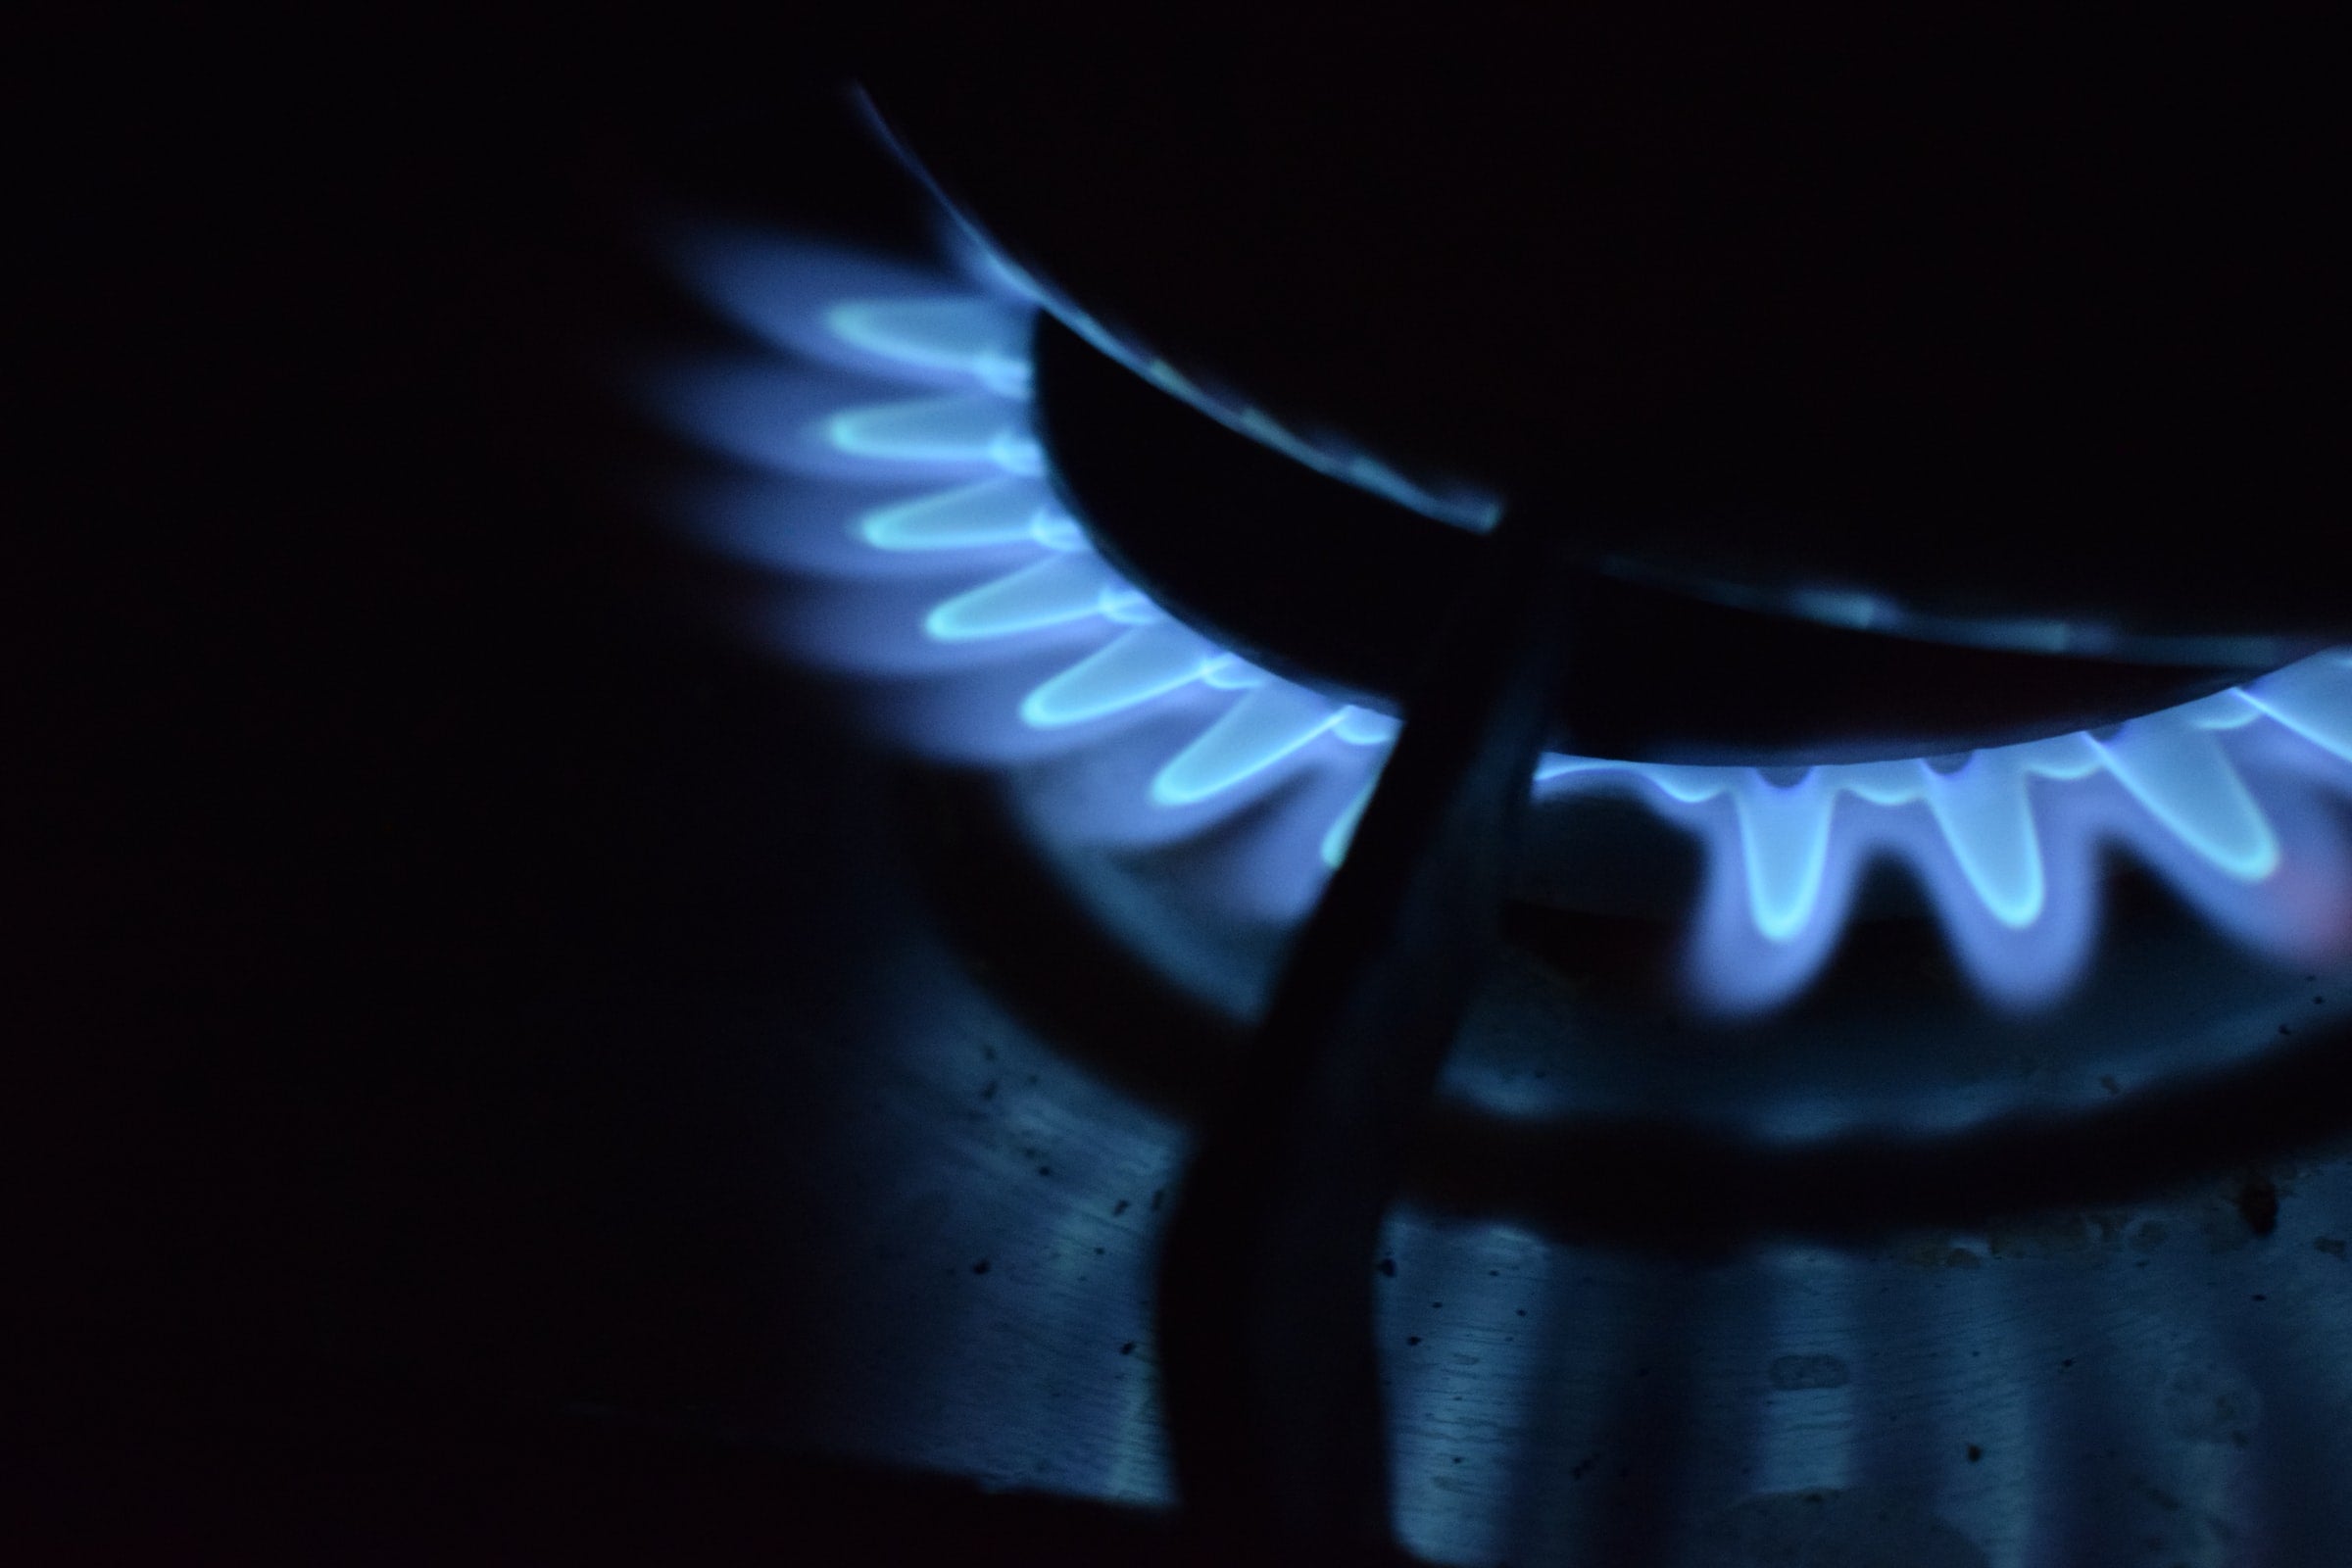 Inflated gas prices push two more UK utilities to bankruptcy